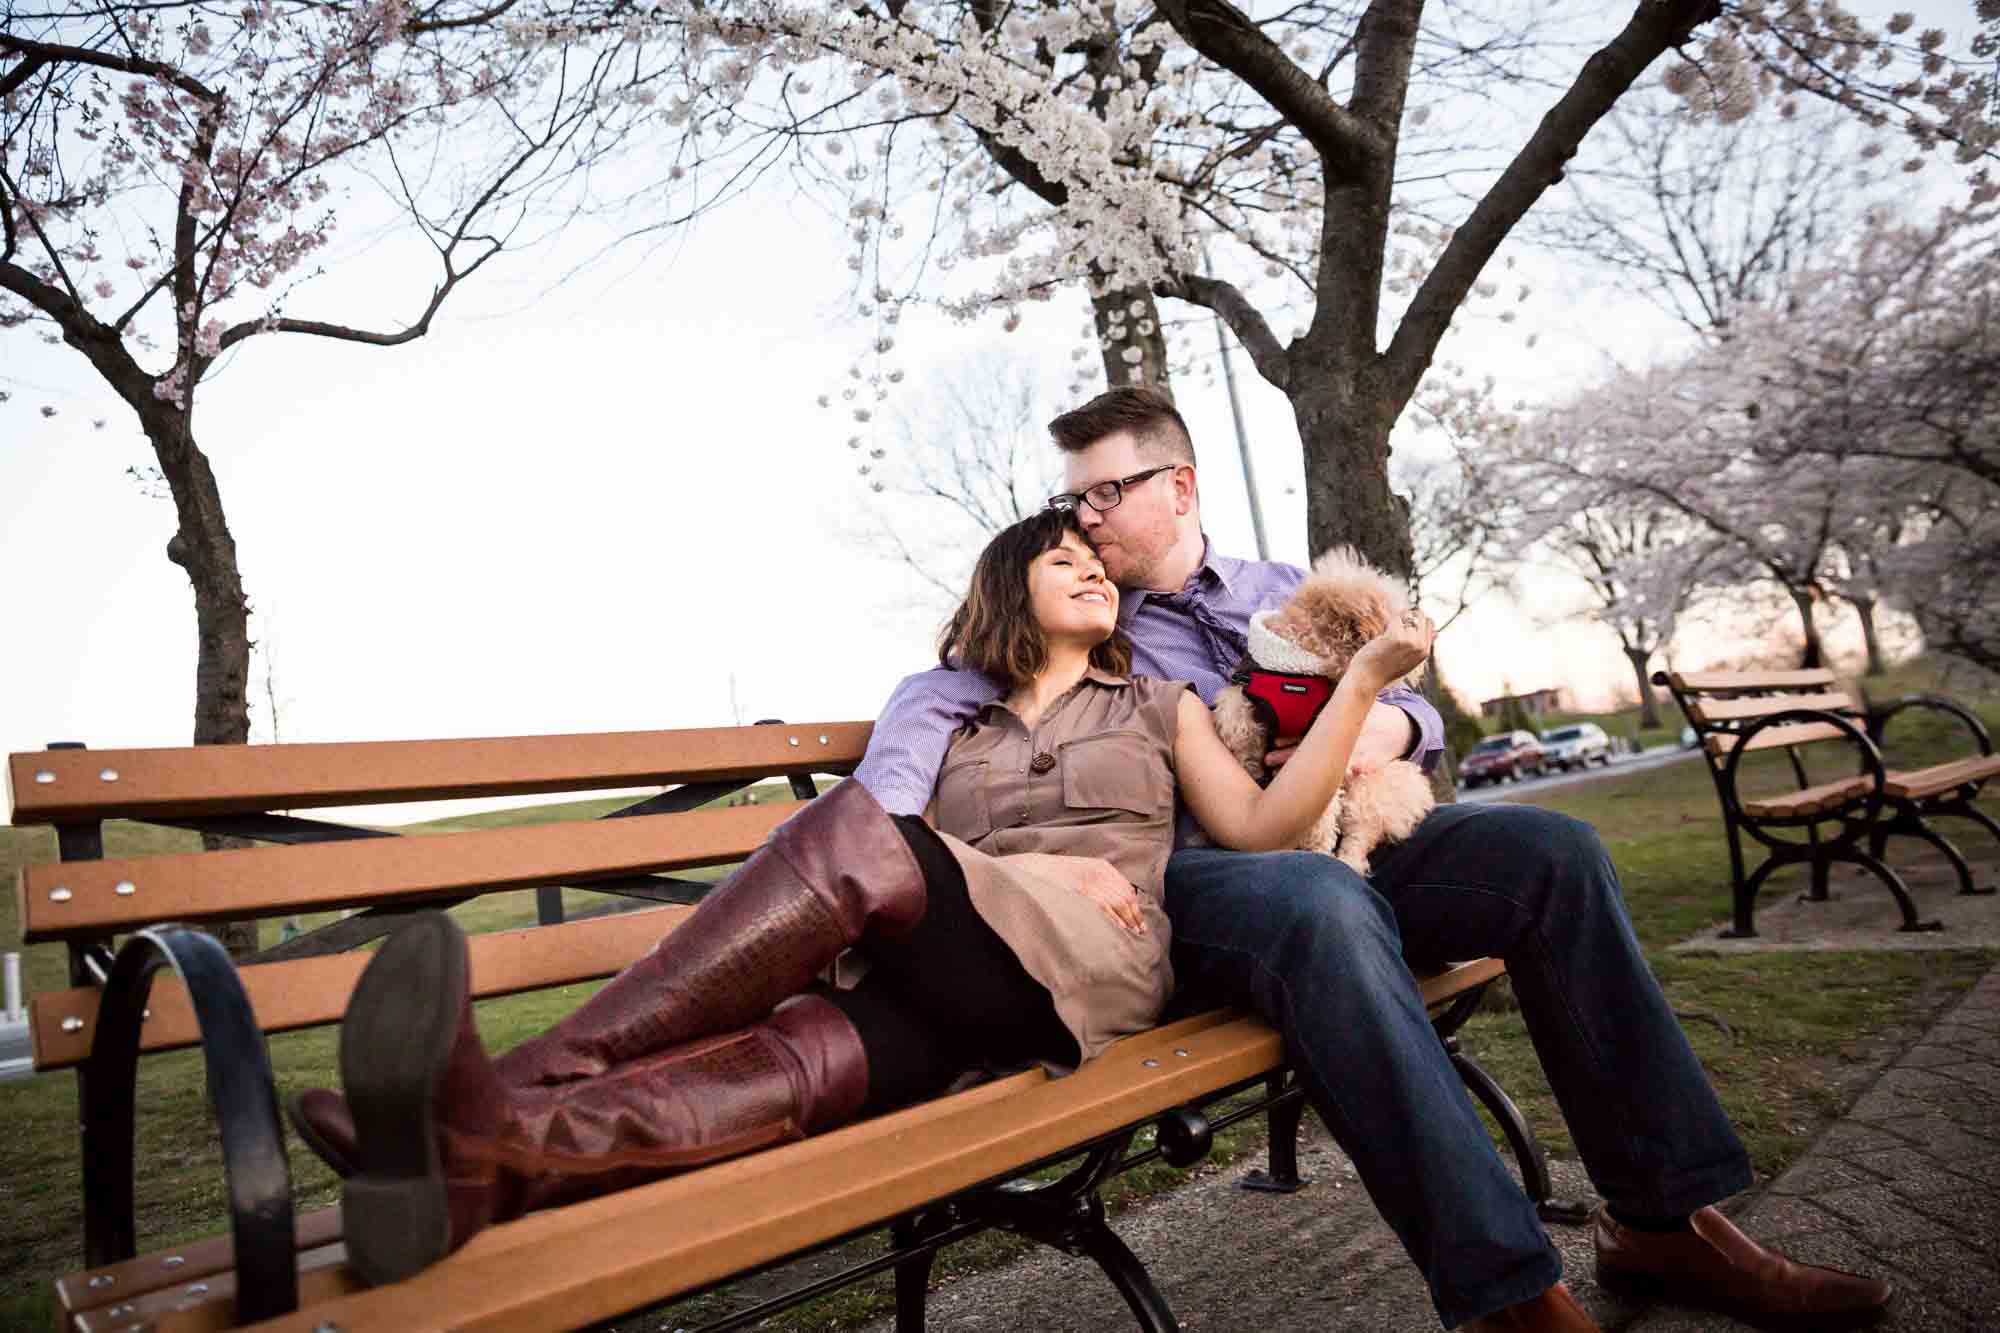 Roosevelt Island engagement portrait for an article on cherry blossom photo tips